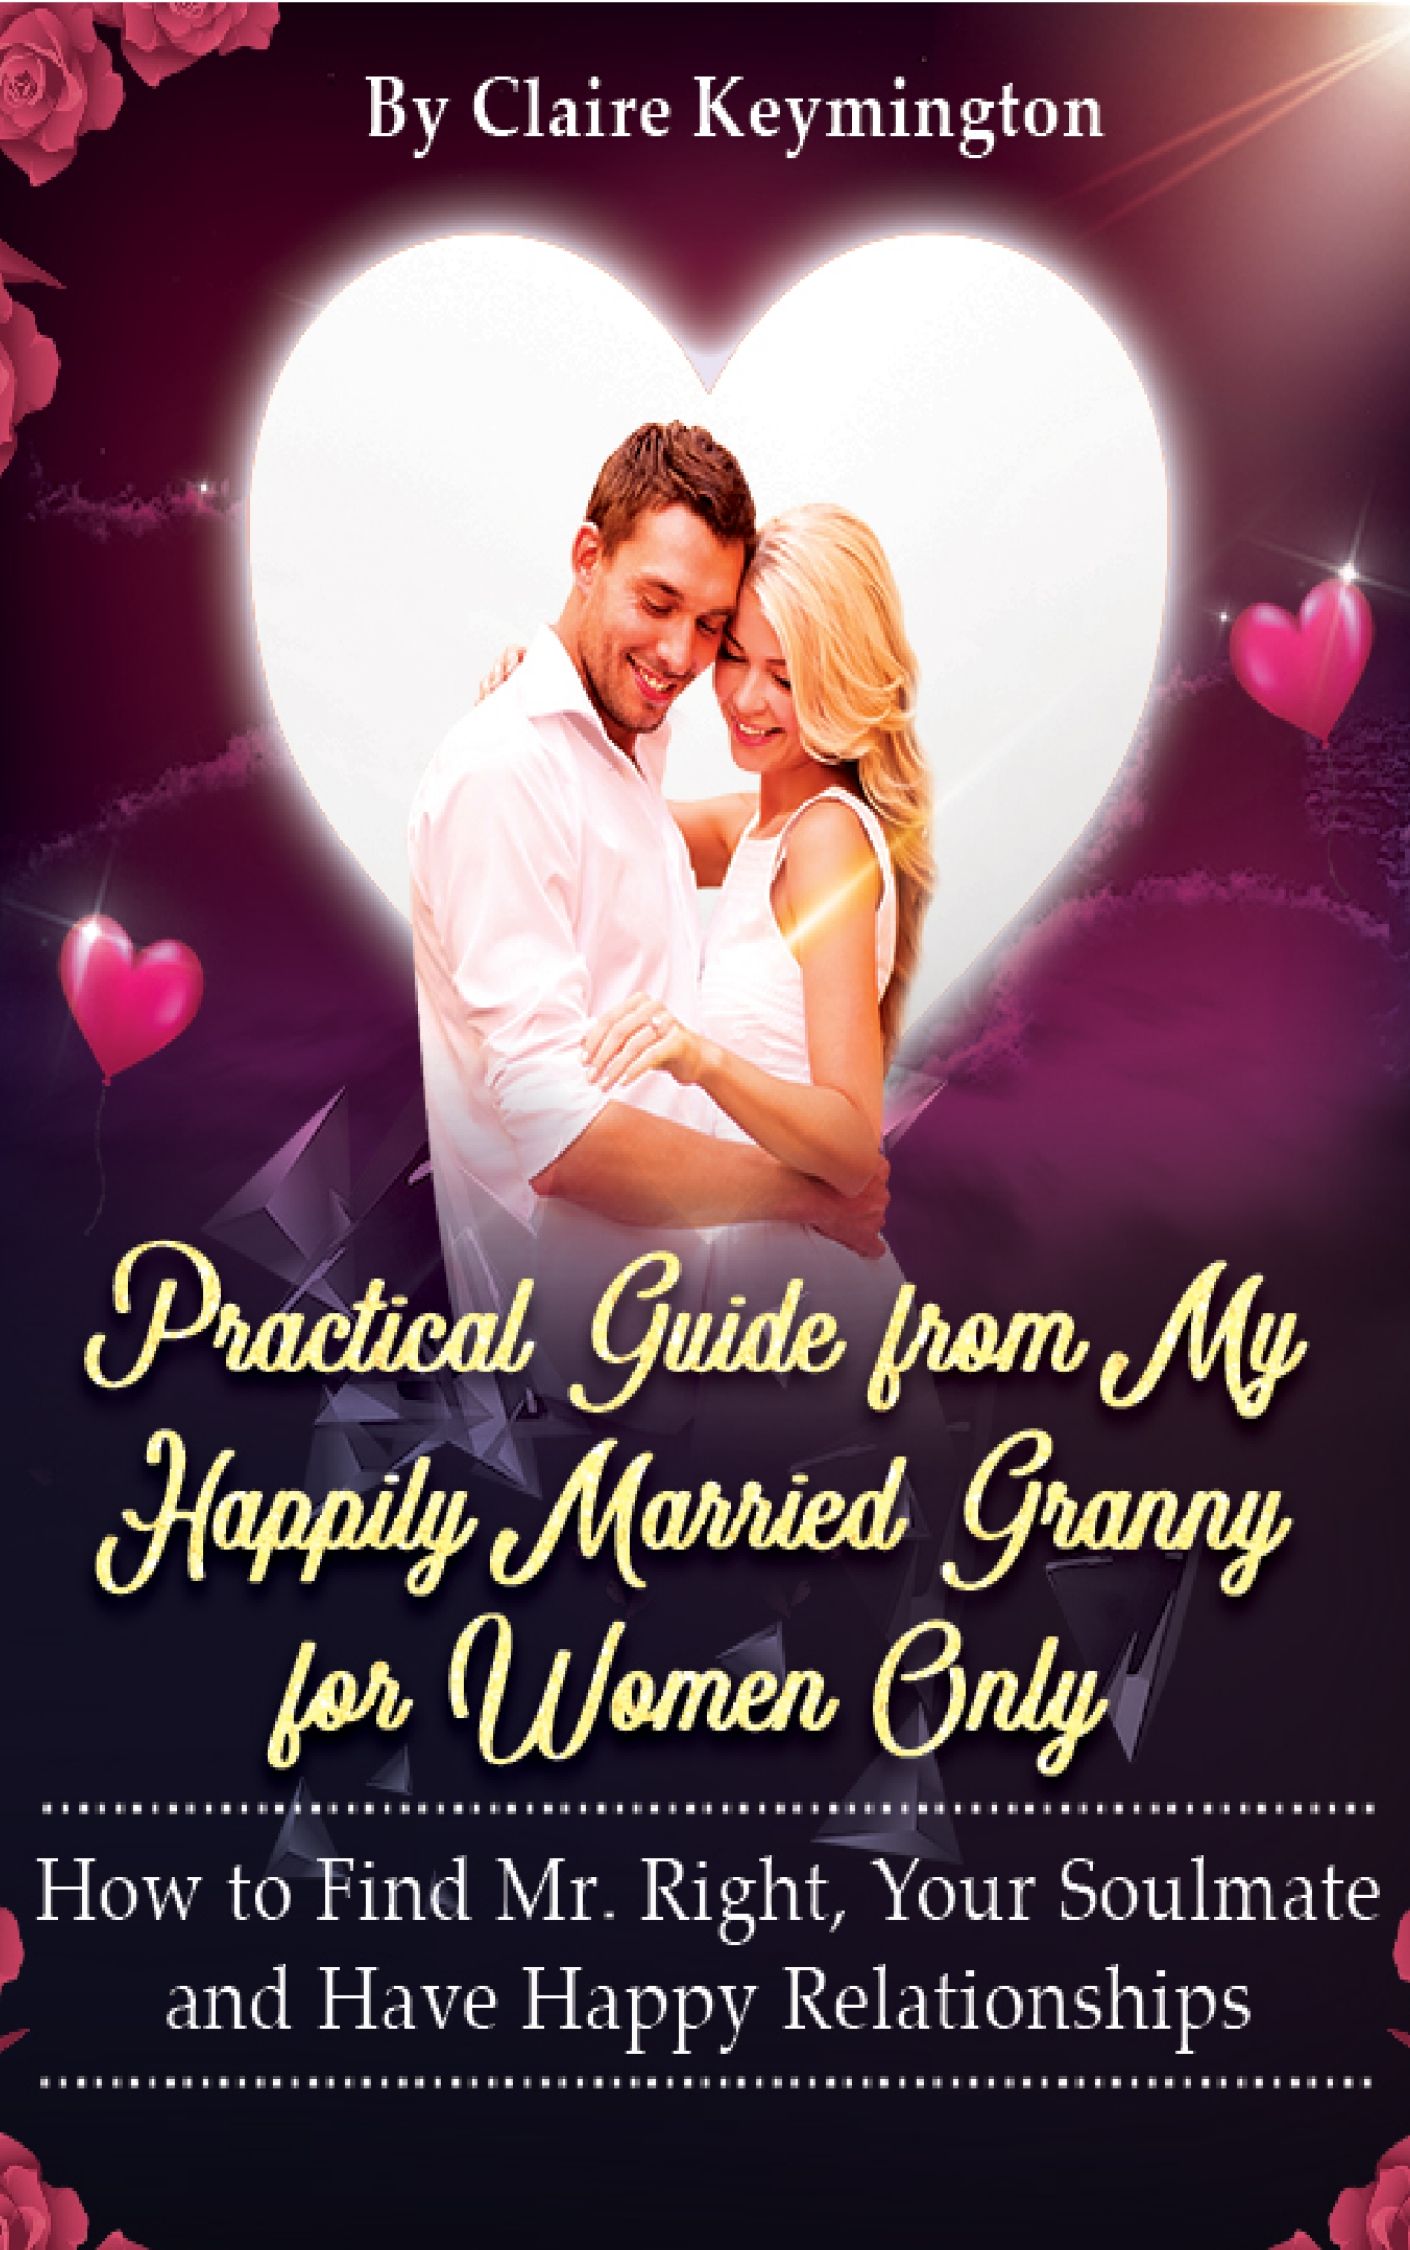 FREE: “Practical Guide from My Happily Married Granny for Women Only:  How to Find Mr. Right, Your Soulmate and Have Happy Relationshipshttp” by Claire Keymington